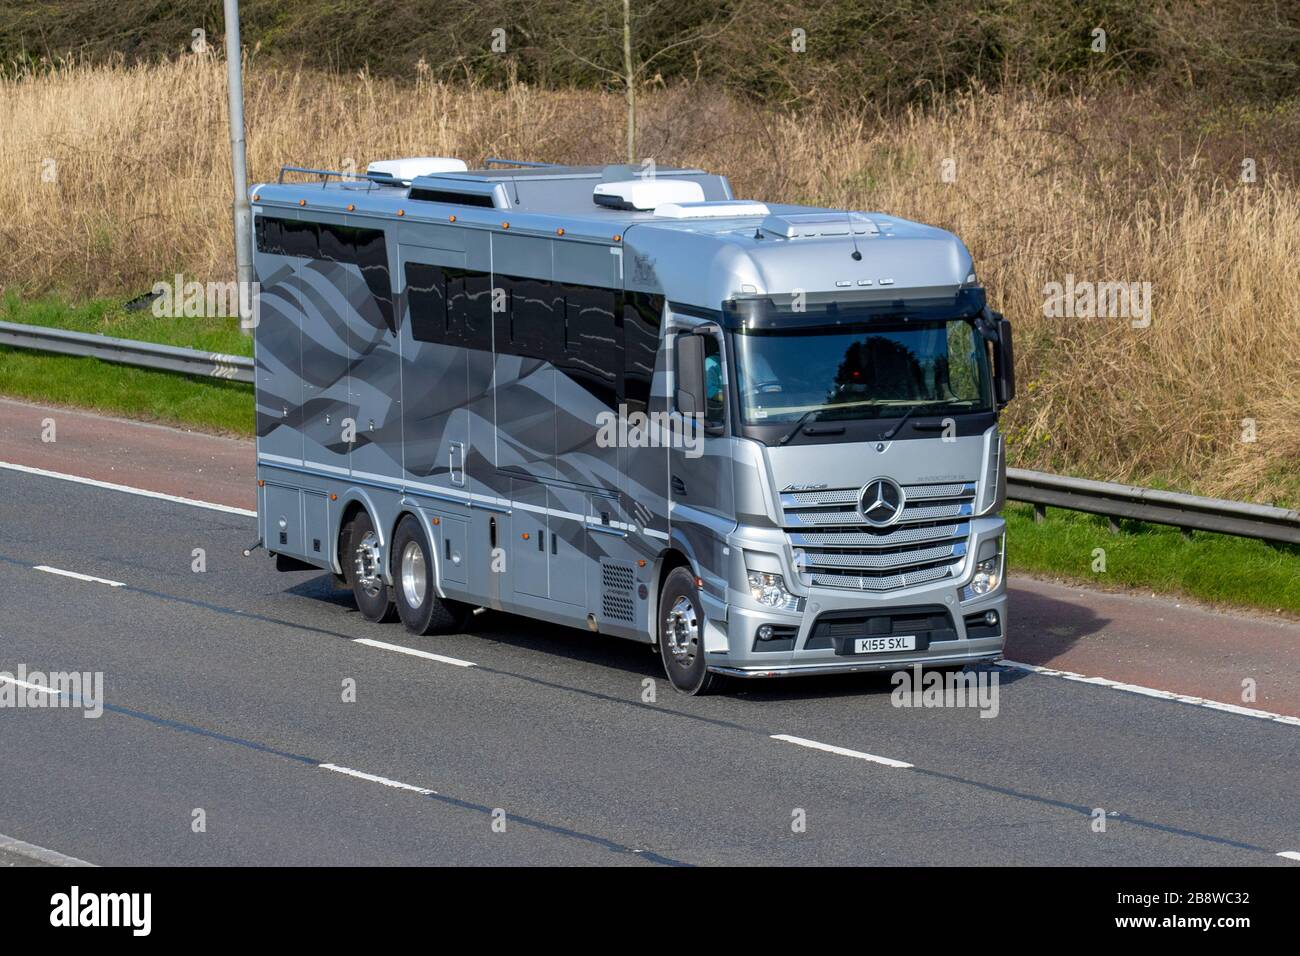 Mercedes Benz Actros Jm Interceptor SXL Touring Caravans and Motorhomes, campervans, RV leisure vehicle, family holidays, vacations, caravan holiday, life on the road M6 motorway, Manchester, UK Stock Photo